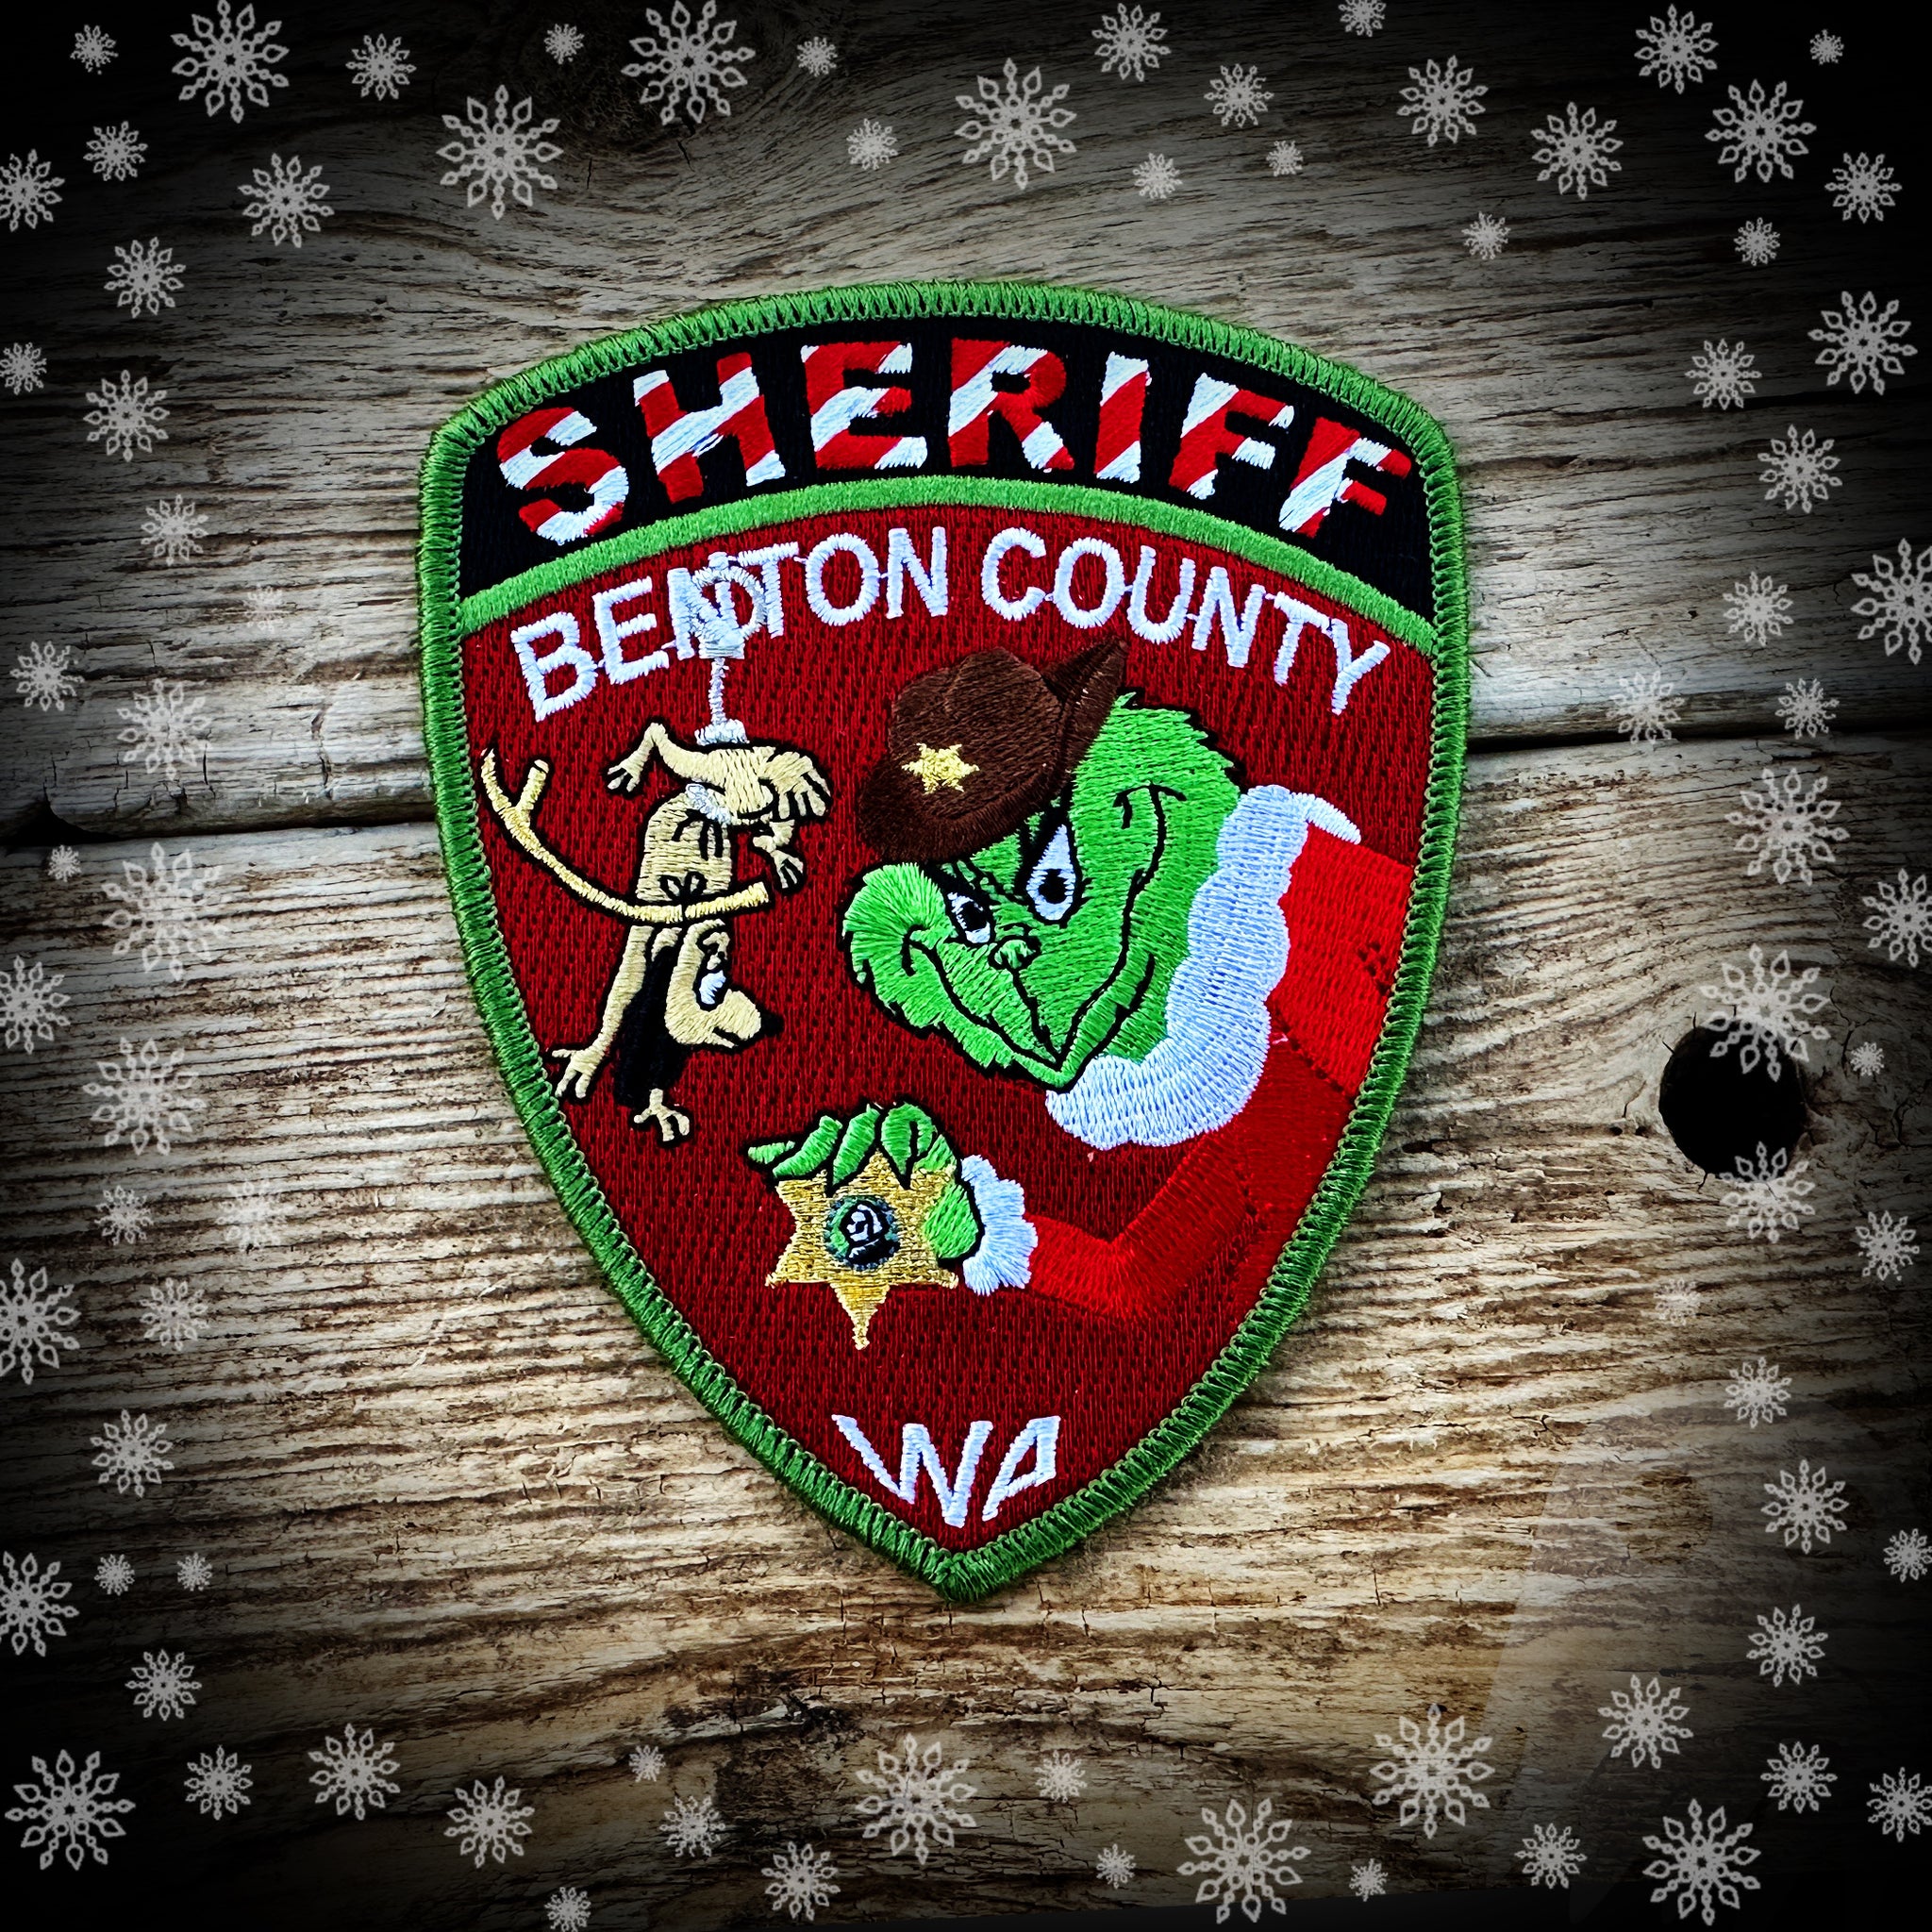 Benton County, WA Sheriff's Officer 2022 Christmas Patch - Authentic and limited!